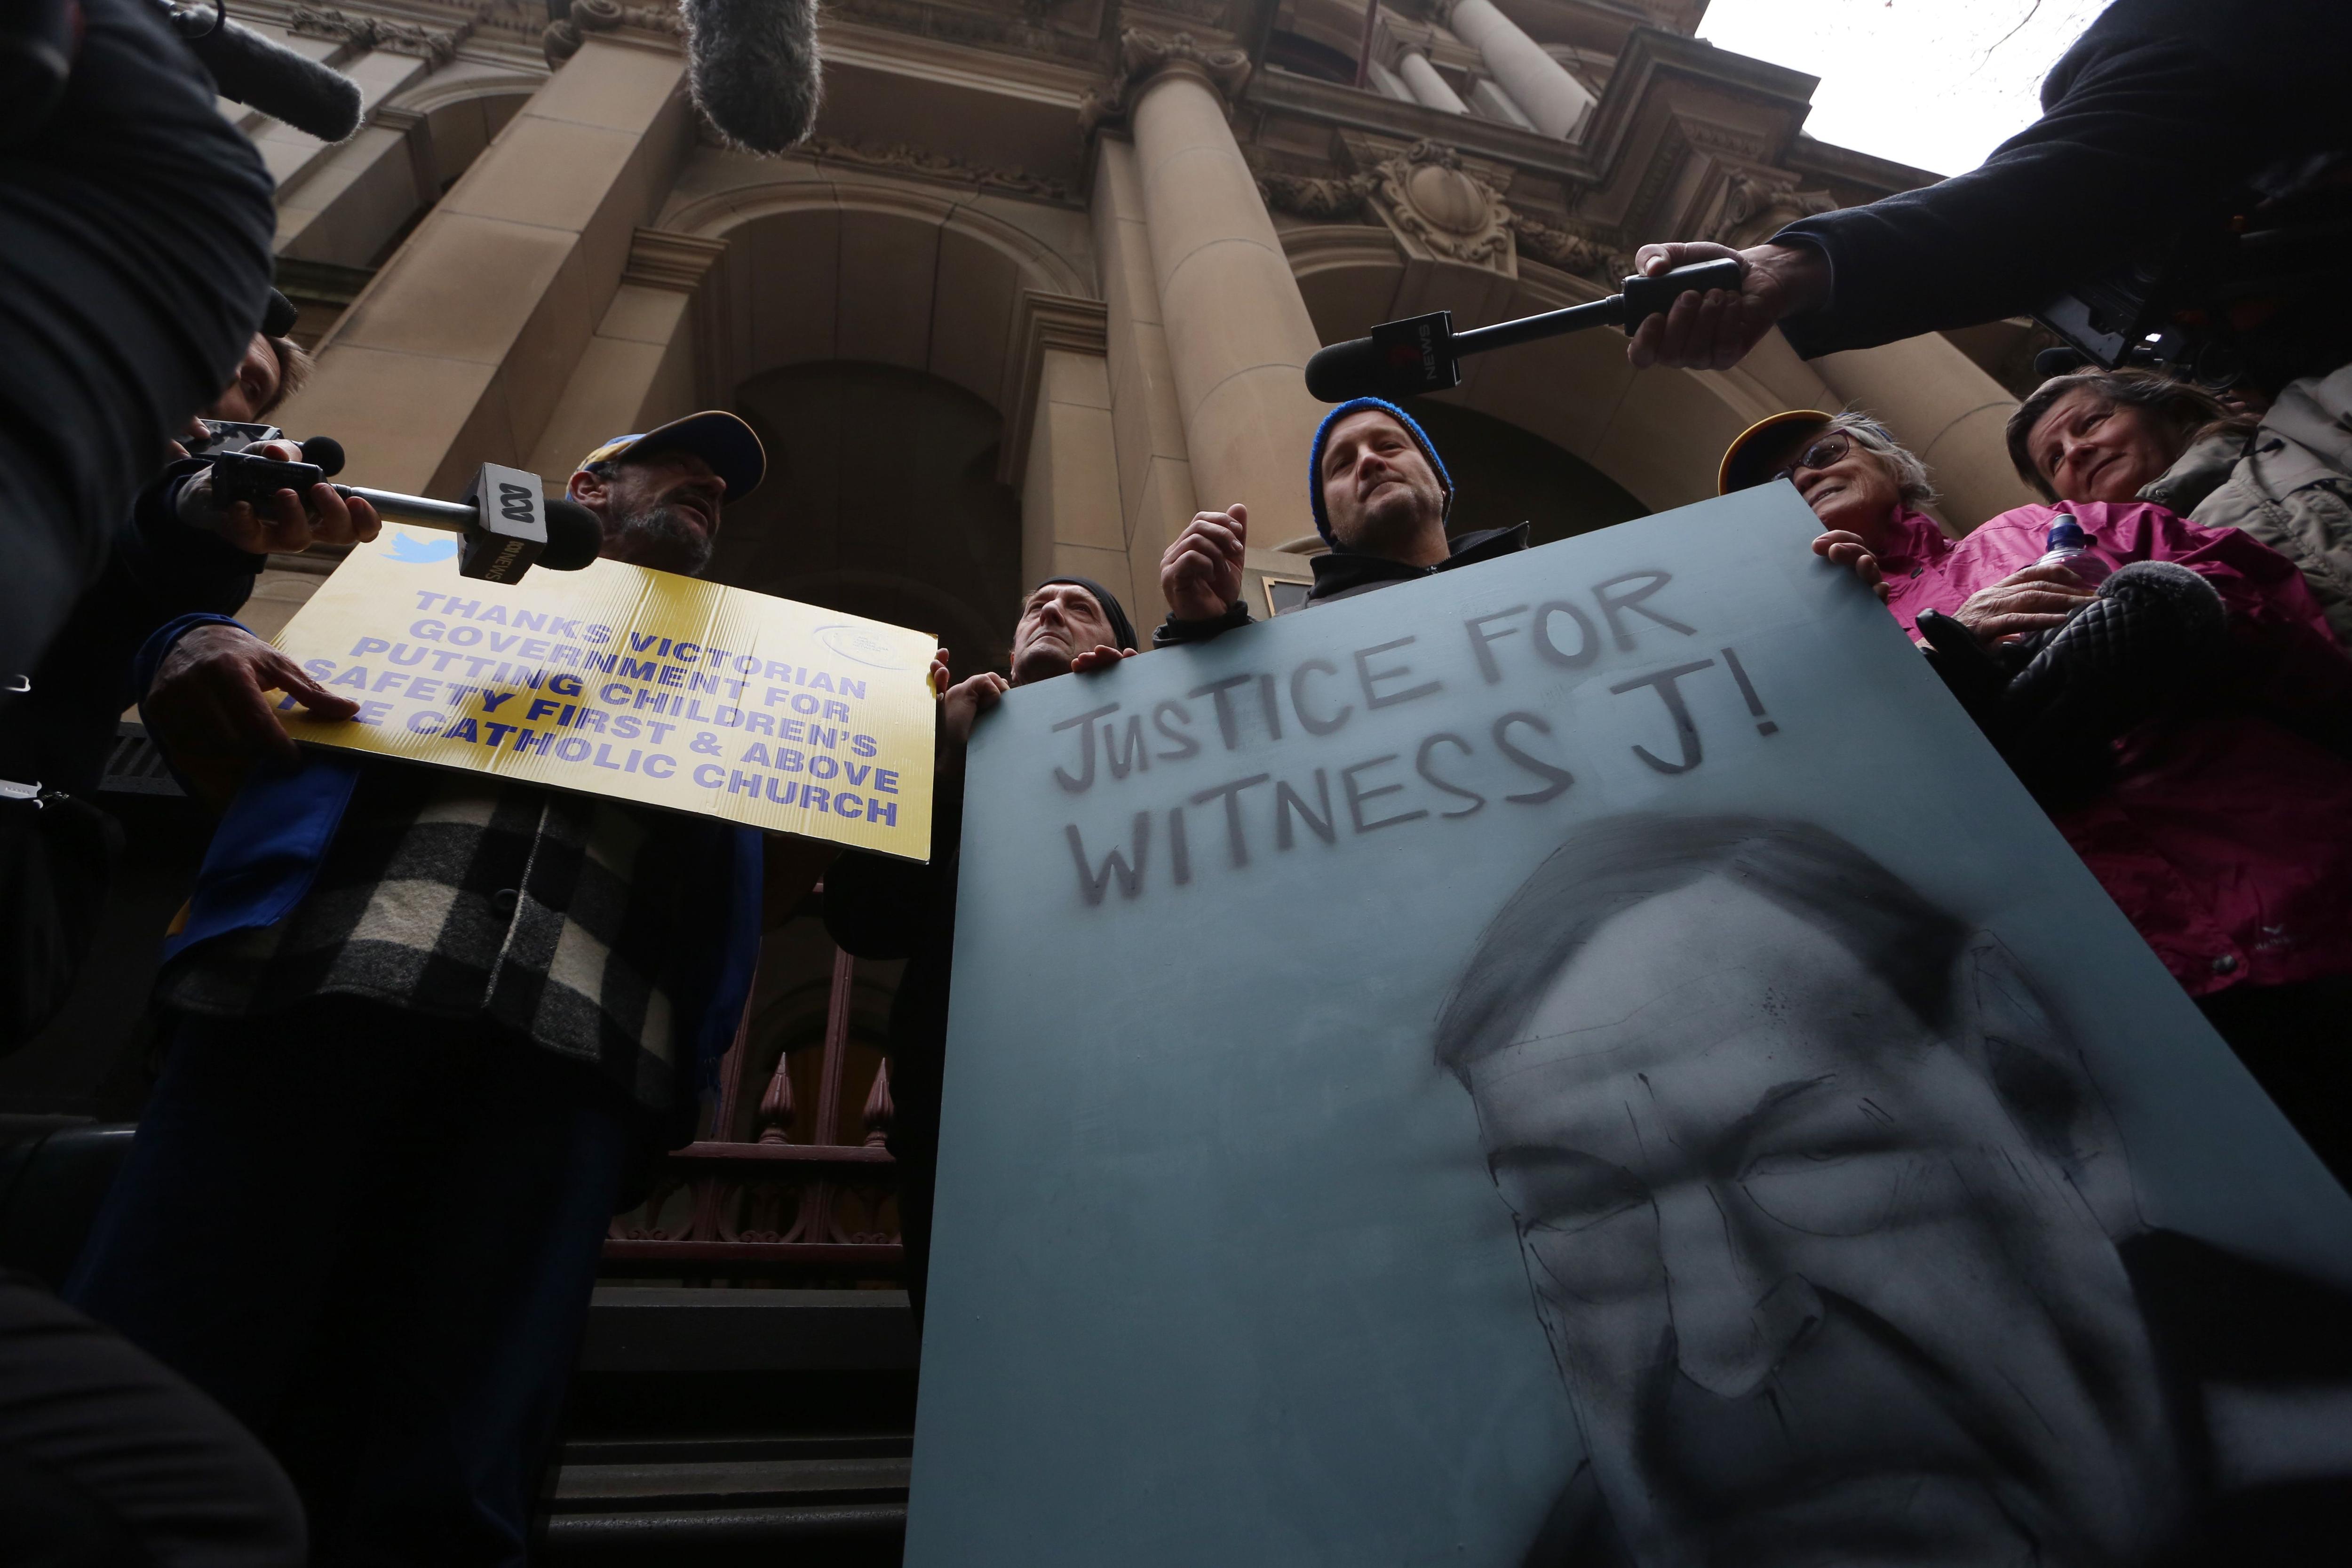 How much reform has the Catholic church made on the issue of child sexual abuse?